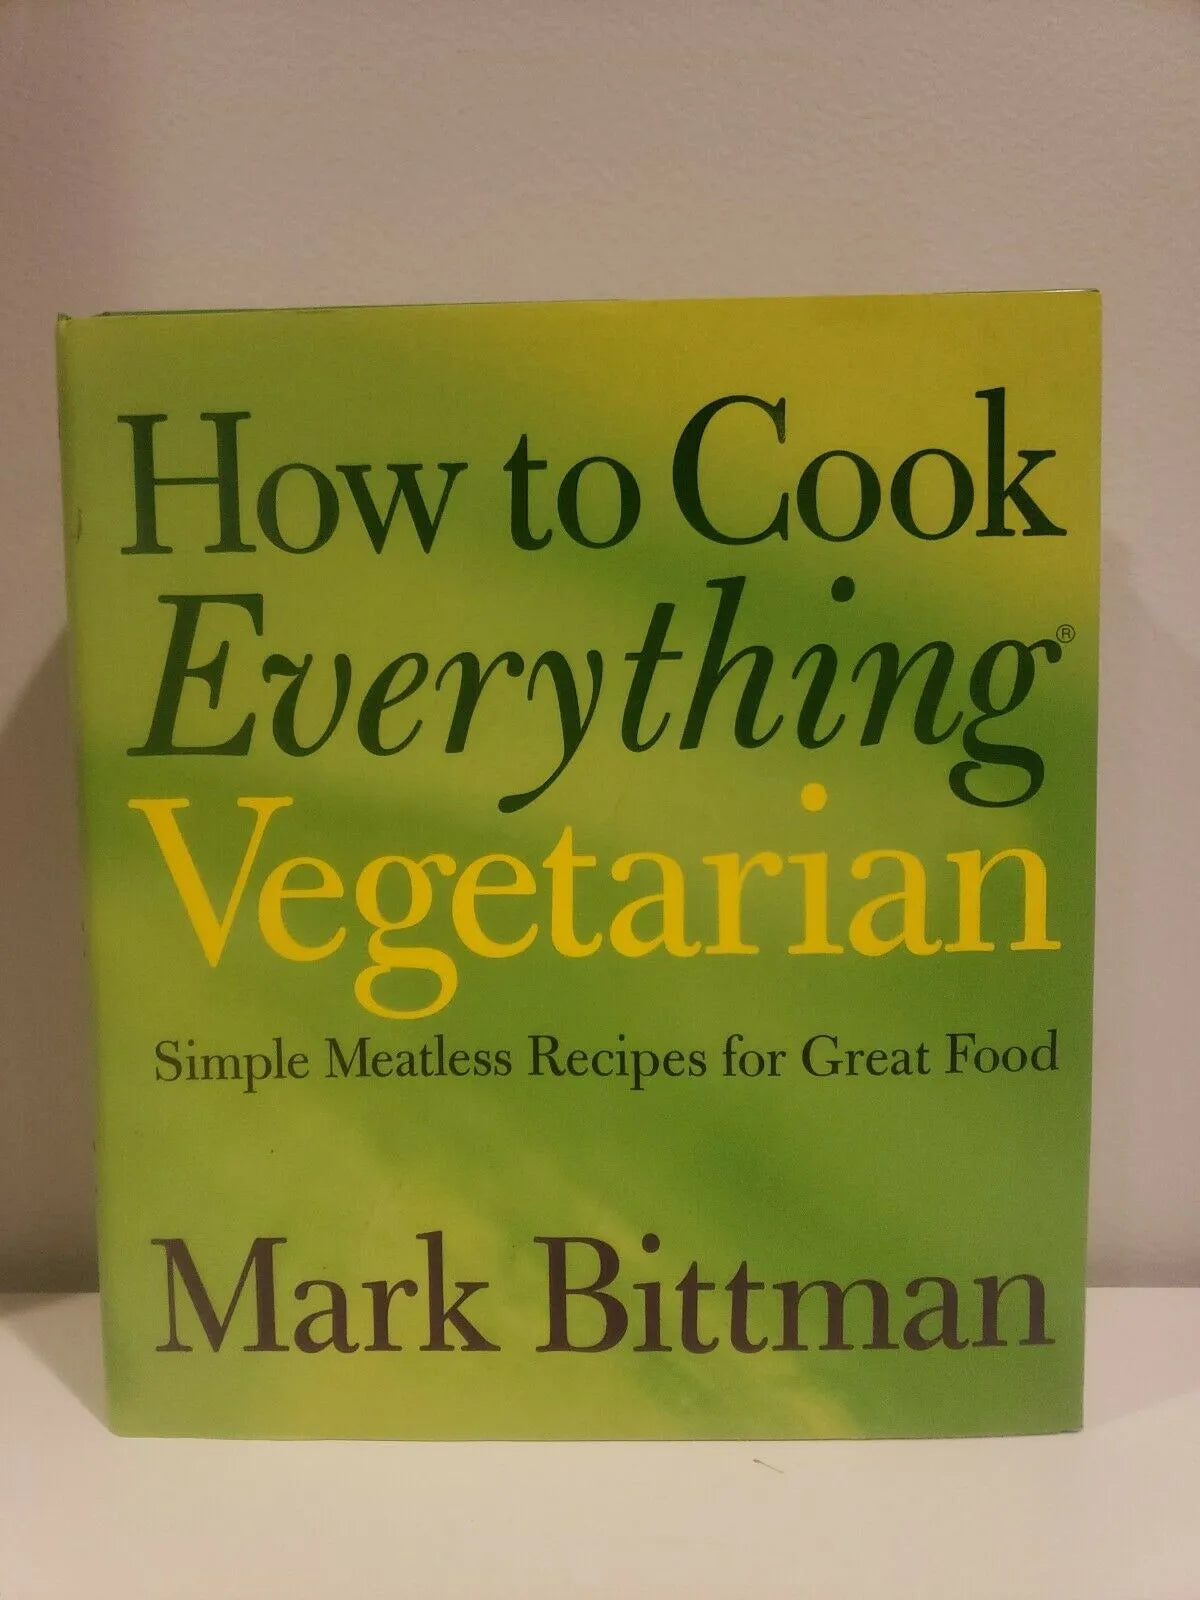 "How to cook everything vegetarian: simple meatless recipes for great food" by Mark Bittman, Vintage, Hardcover